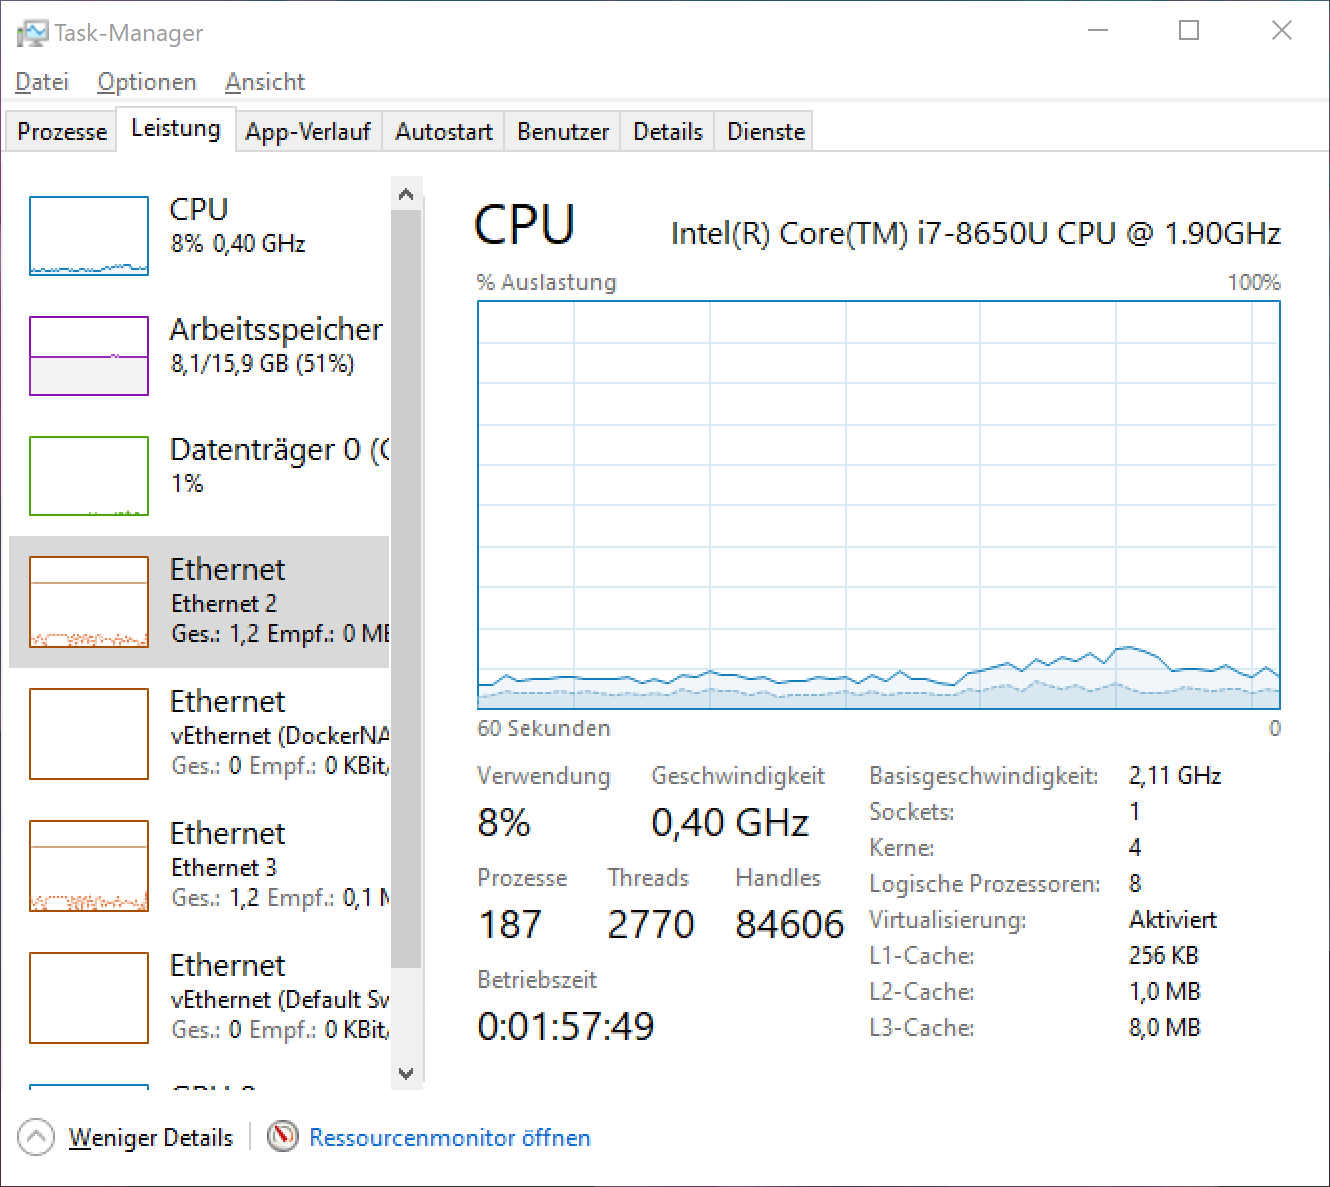 CPU throttling stuck at speed far beyond what was considered minimum for Win 10 in 2015 3de0b85e-dd6e-49cf-8364-e1e35bb37beb?upload=true.png